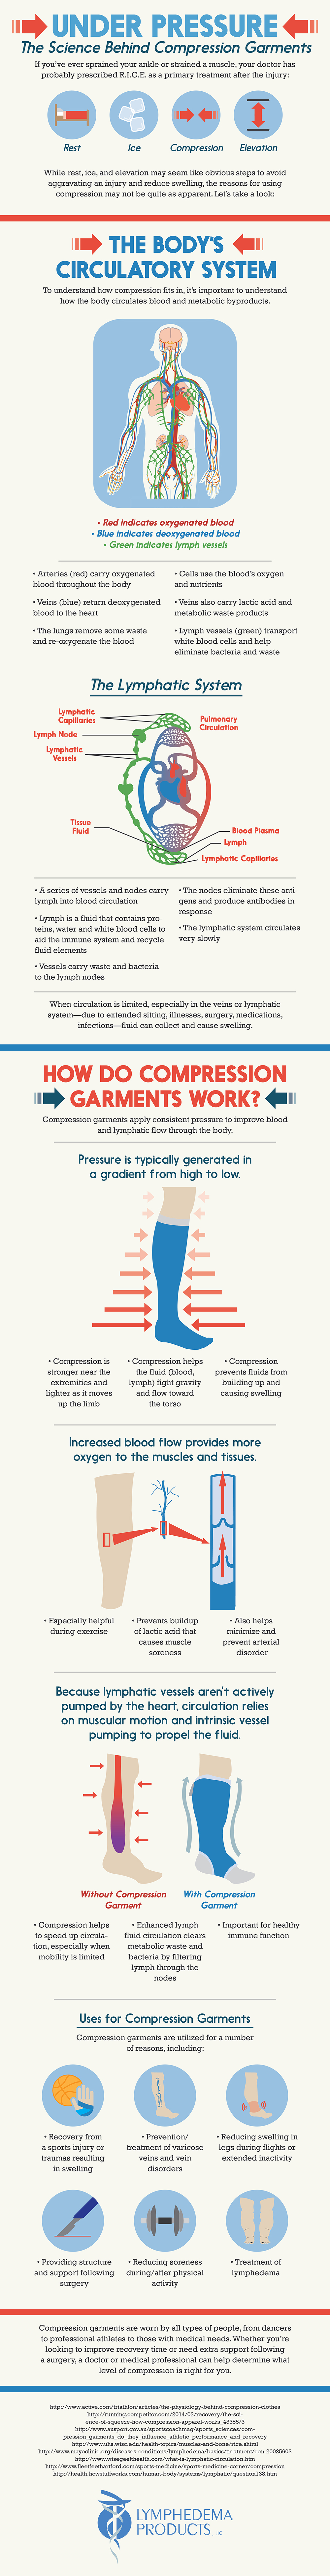 Compression Garments: Why They’re a Primary Treatment for Many Injuries - Infographic